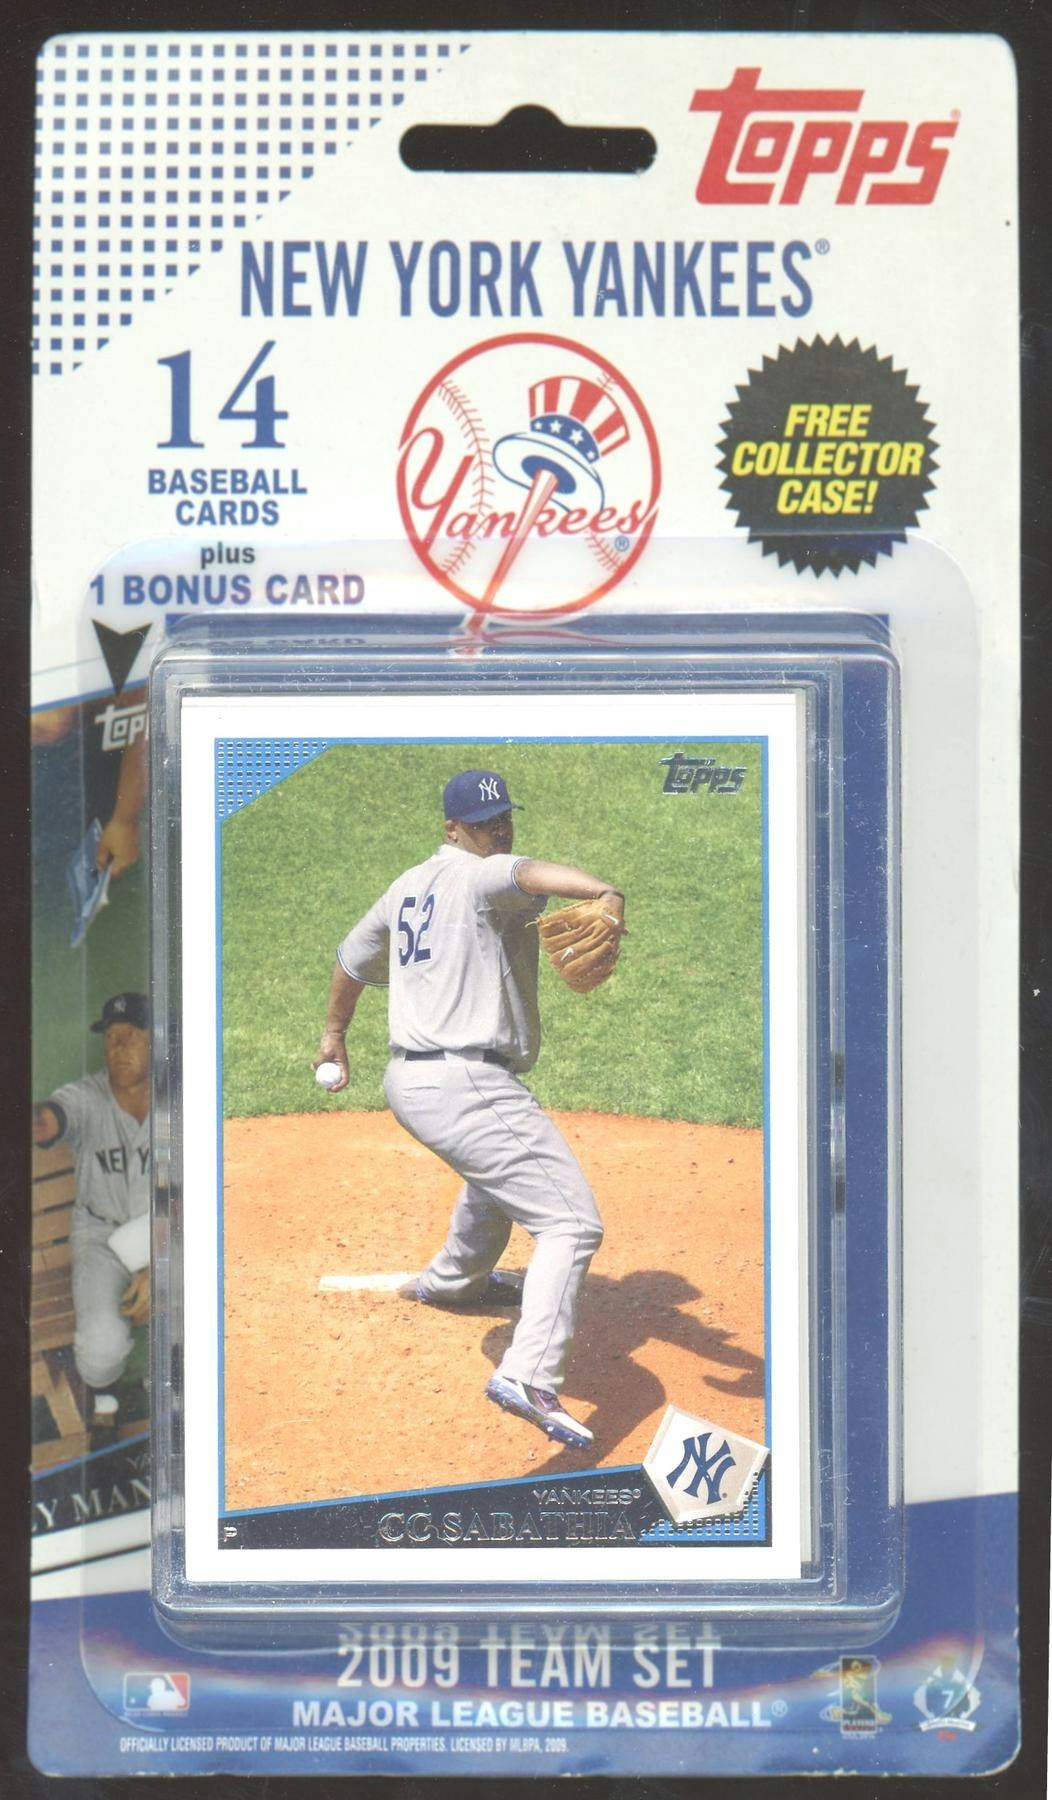 First look: 2009 Topps New York Yankees World Series Champions set